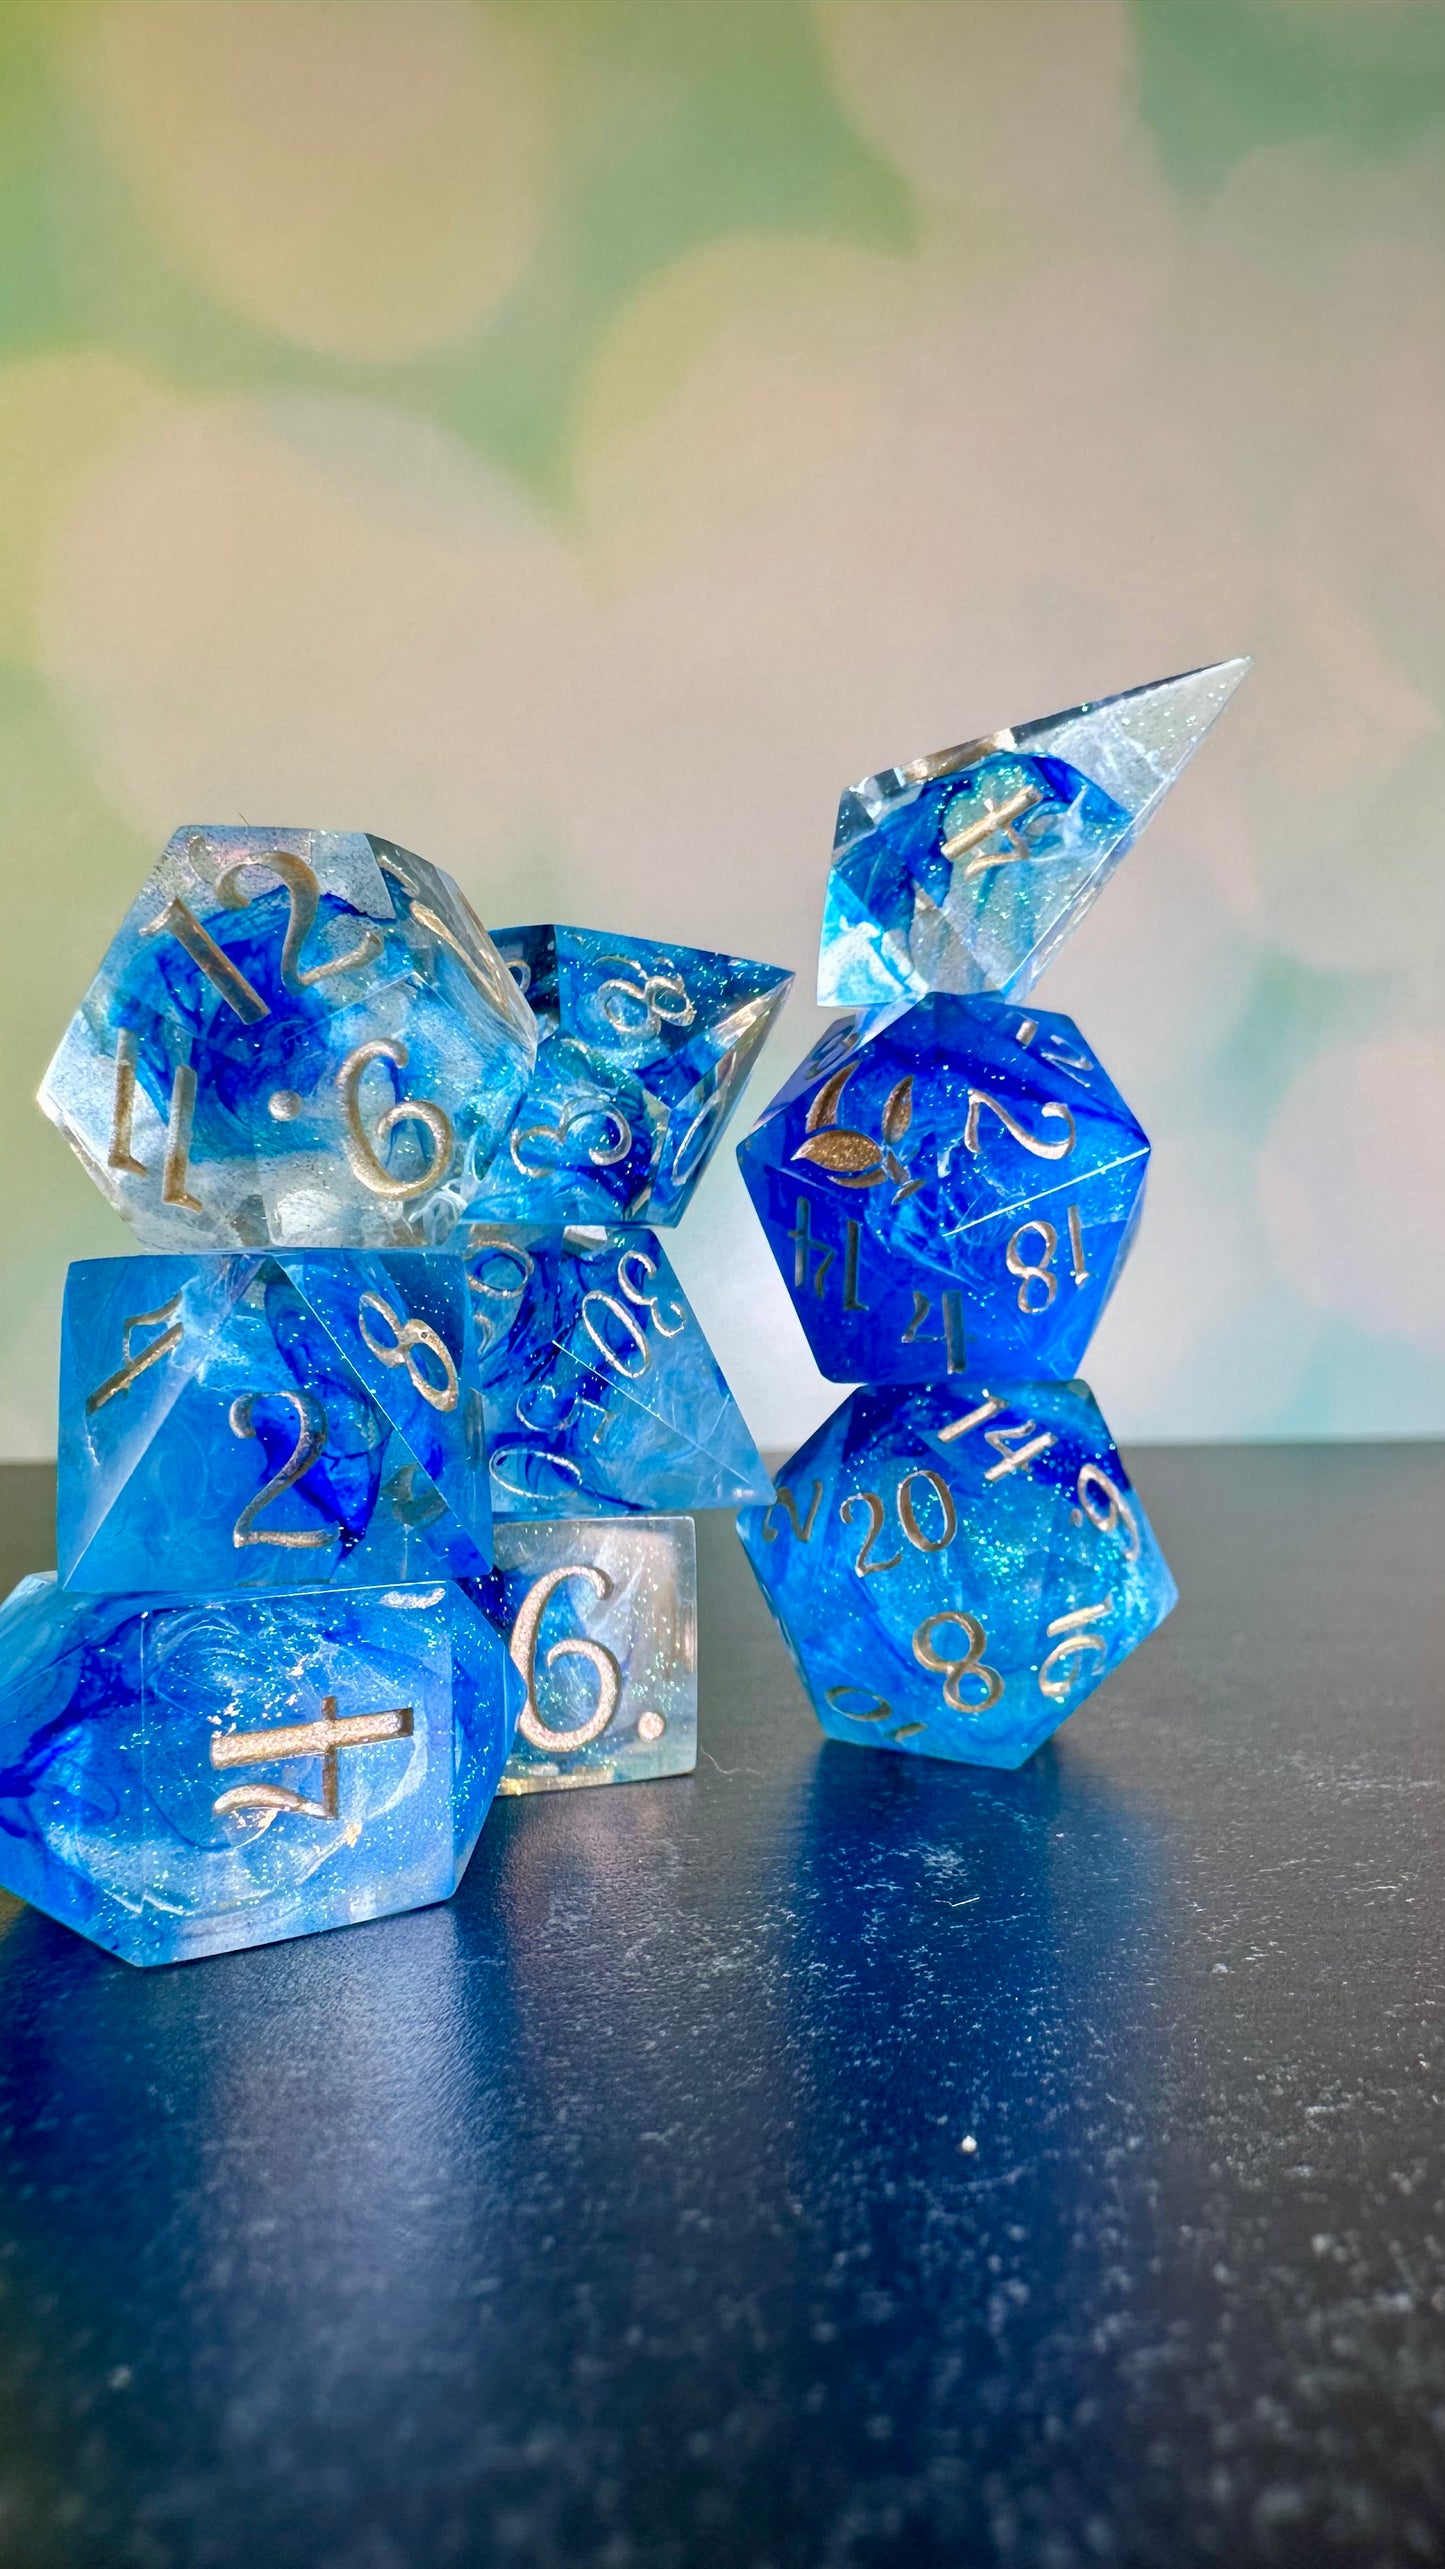 Weather Mage- 8 piece polyhedral dice set